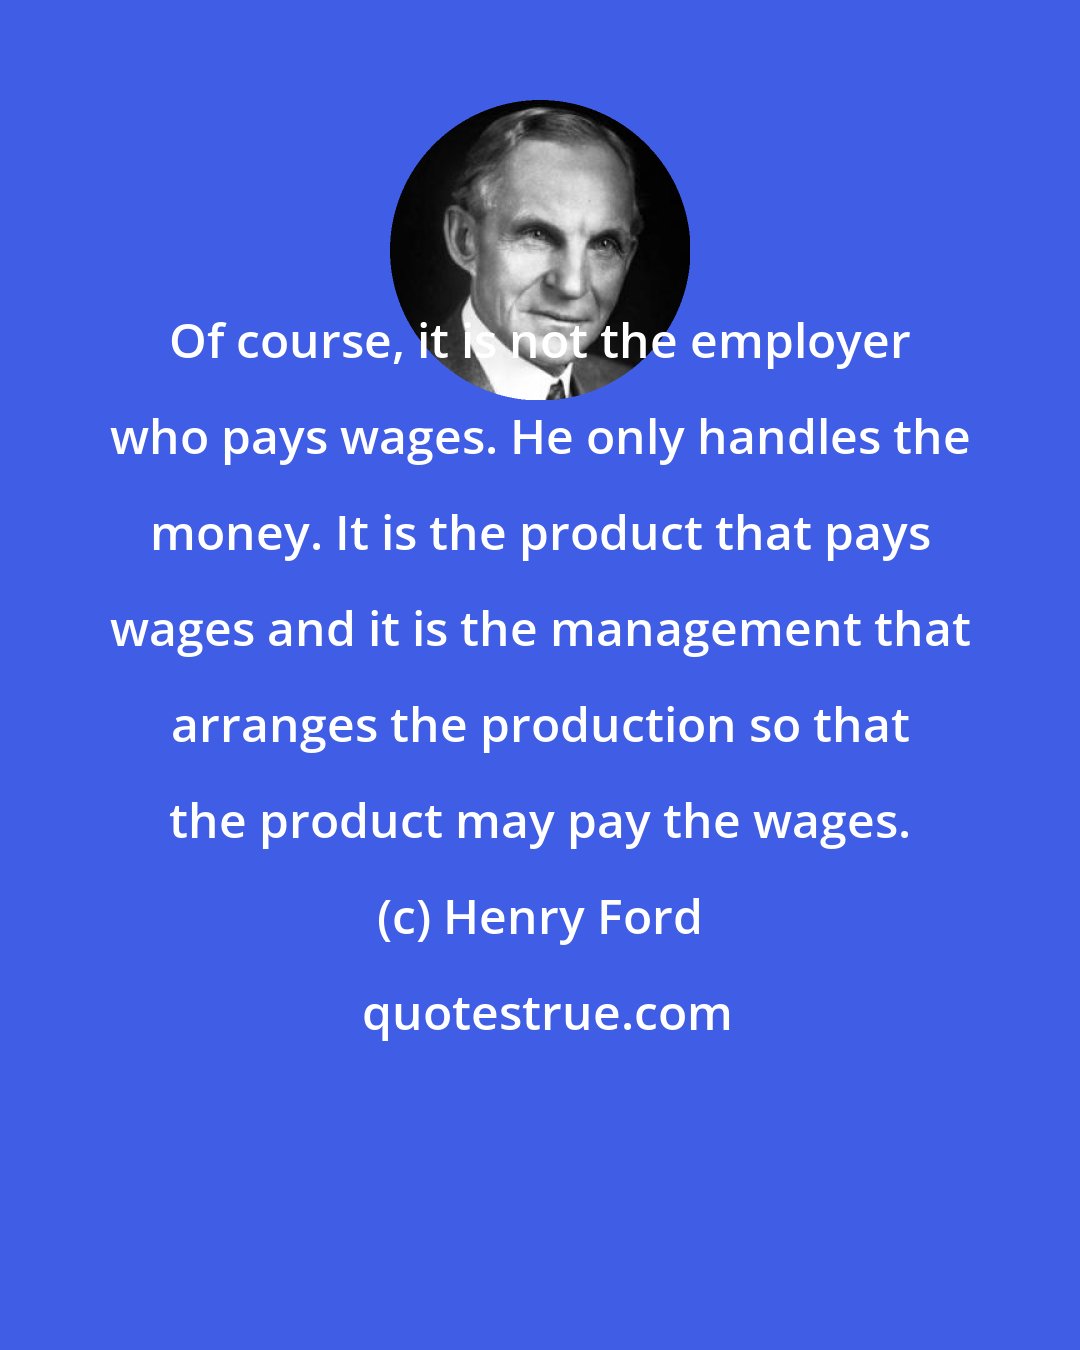 Henry Ford: Of course, it is not the employer who pays wages. He only handles the money. It is the product that pays wages and it is the management that arranges the production so that the product may pay the wages.